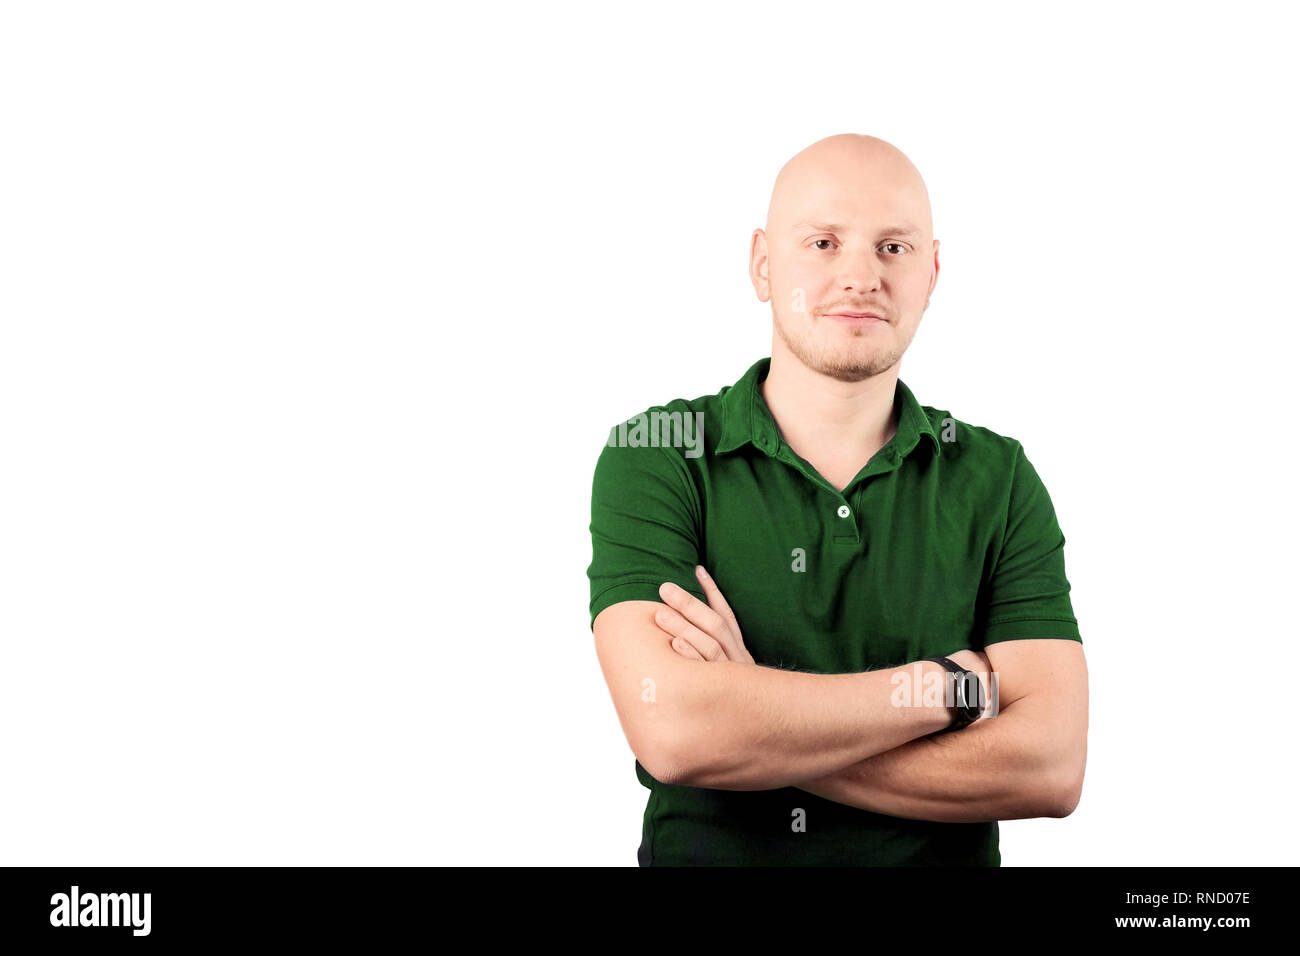 Young adult looking at camera with smiling and proud expression Stock Photo